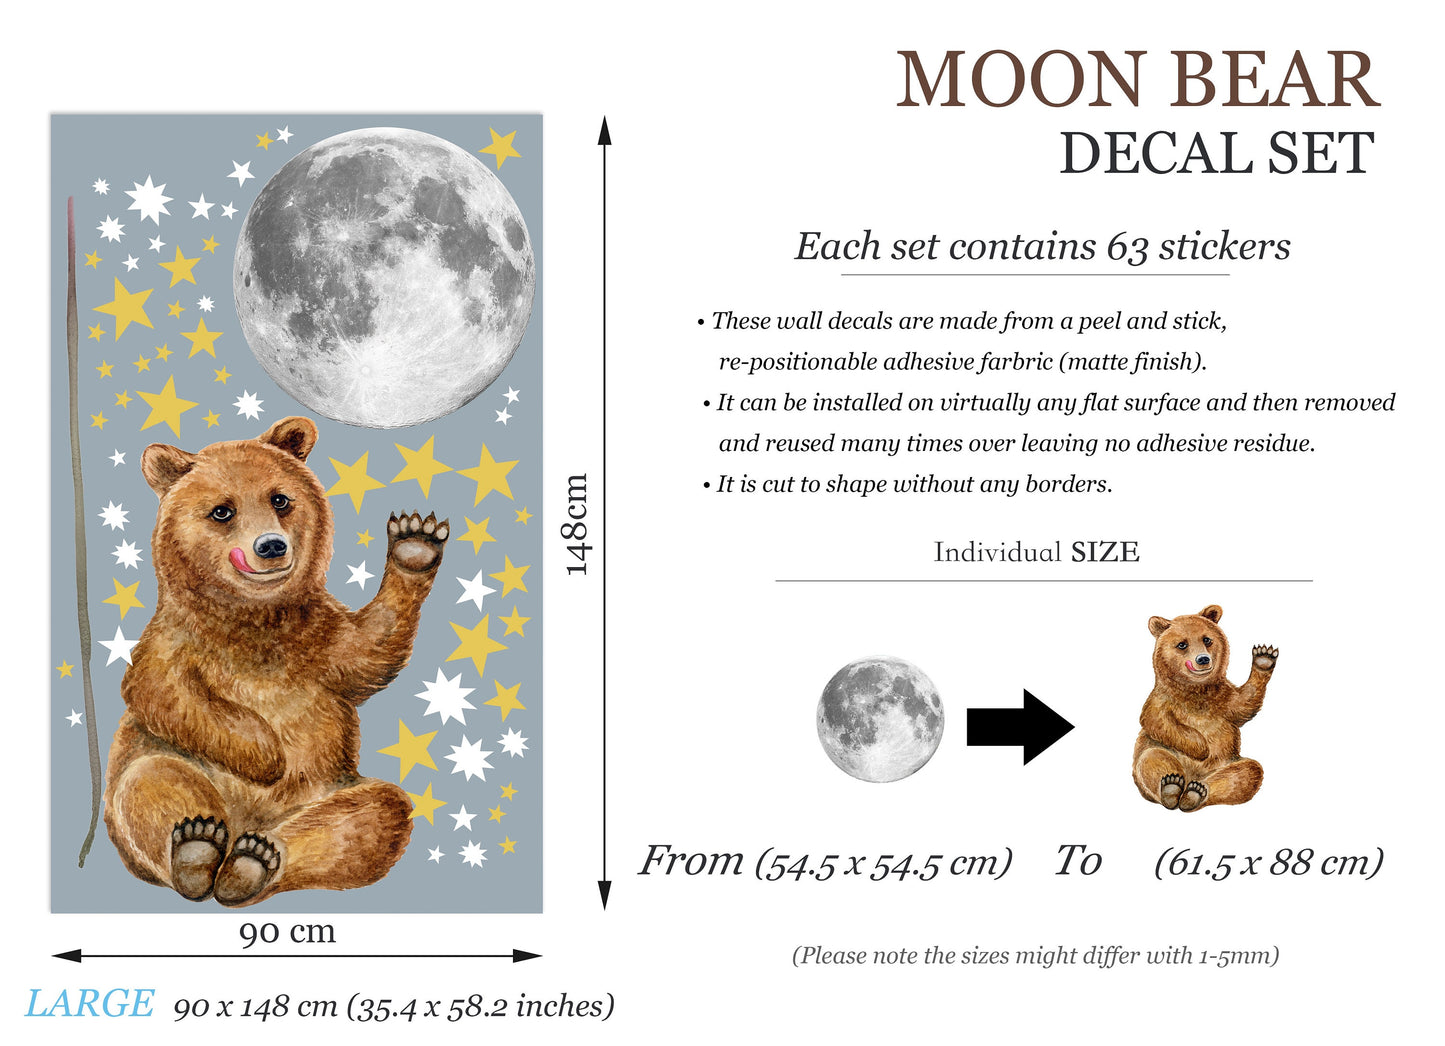 Brown Bear Under Full Moon Starry Removable Wall Decal - Stars Night Sky - BR448